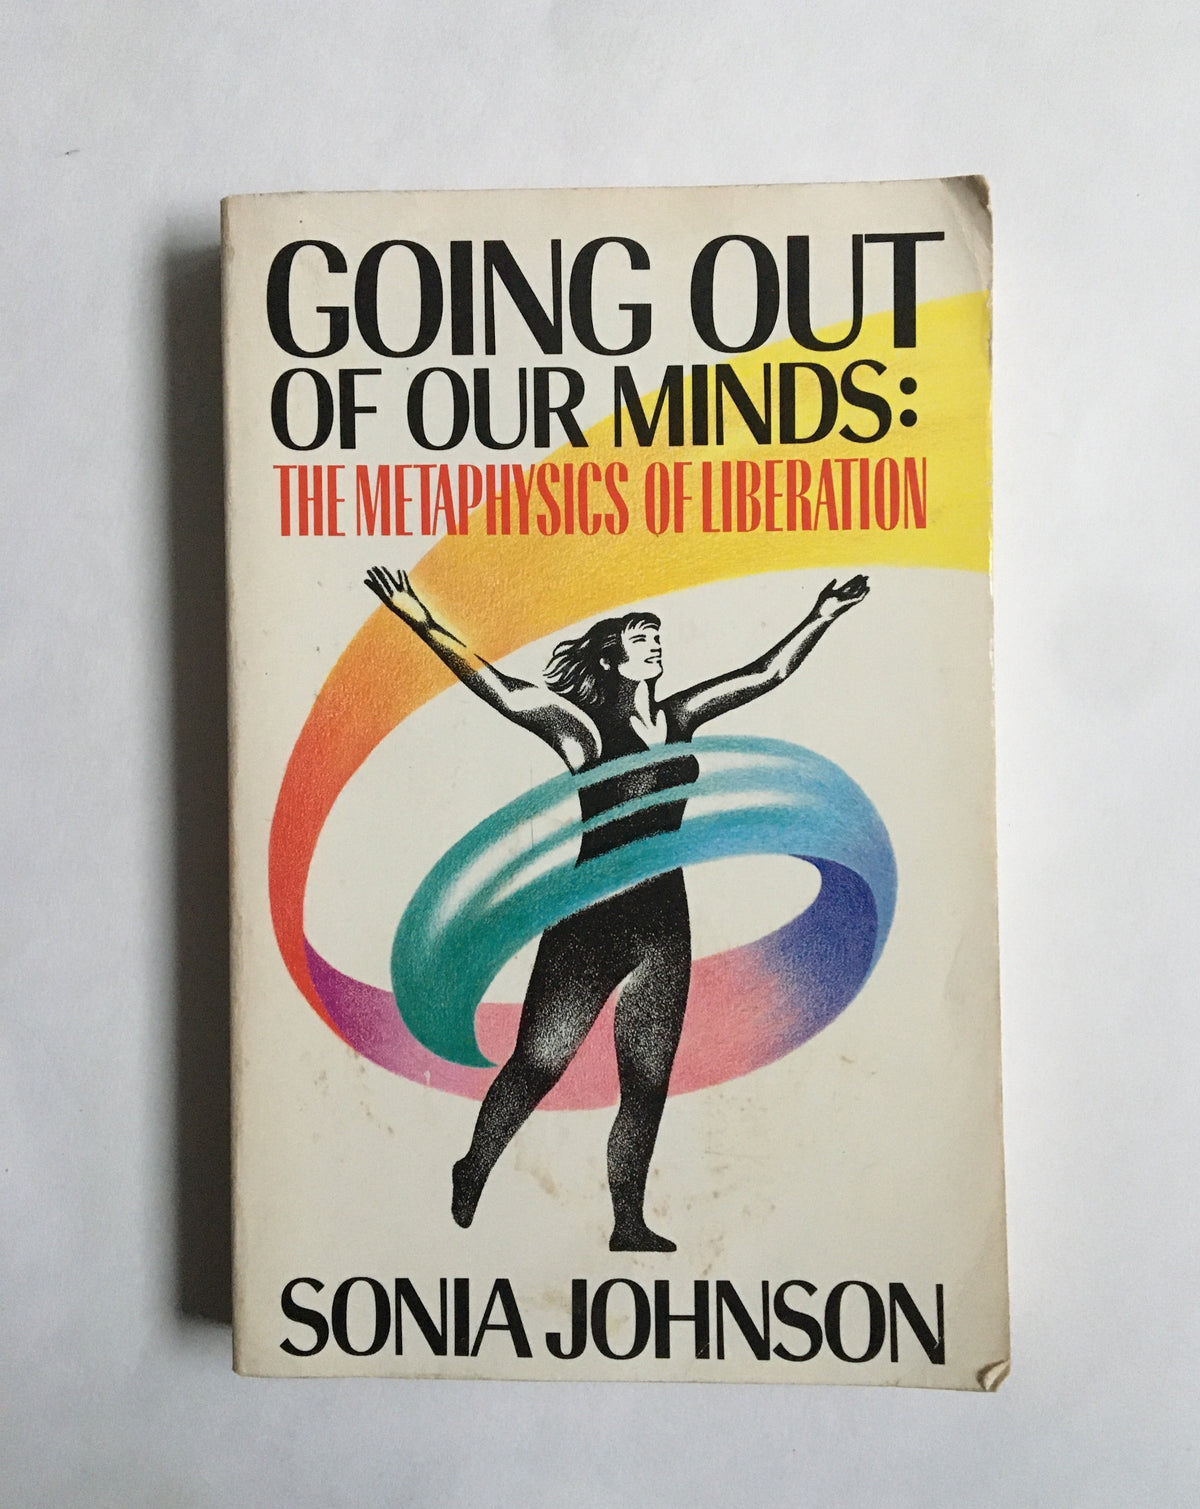 Going Out of Our Minds: The Metaphysics of Liberation by Sonia Johnson